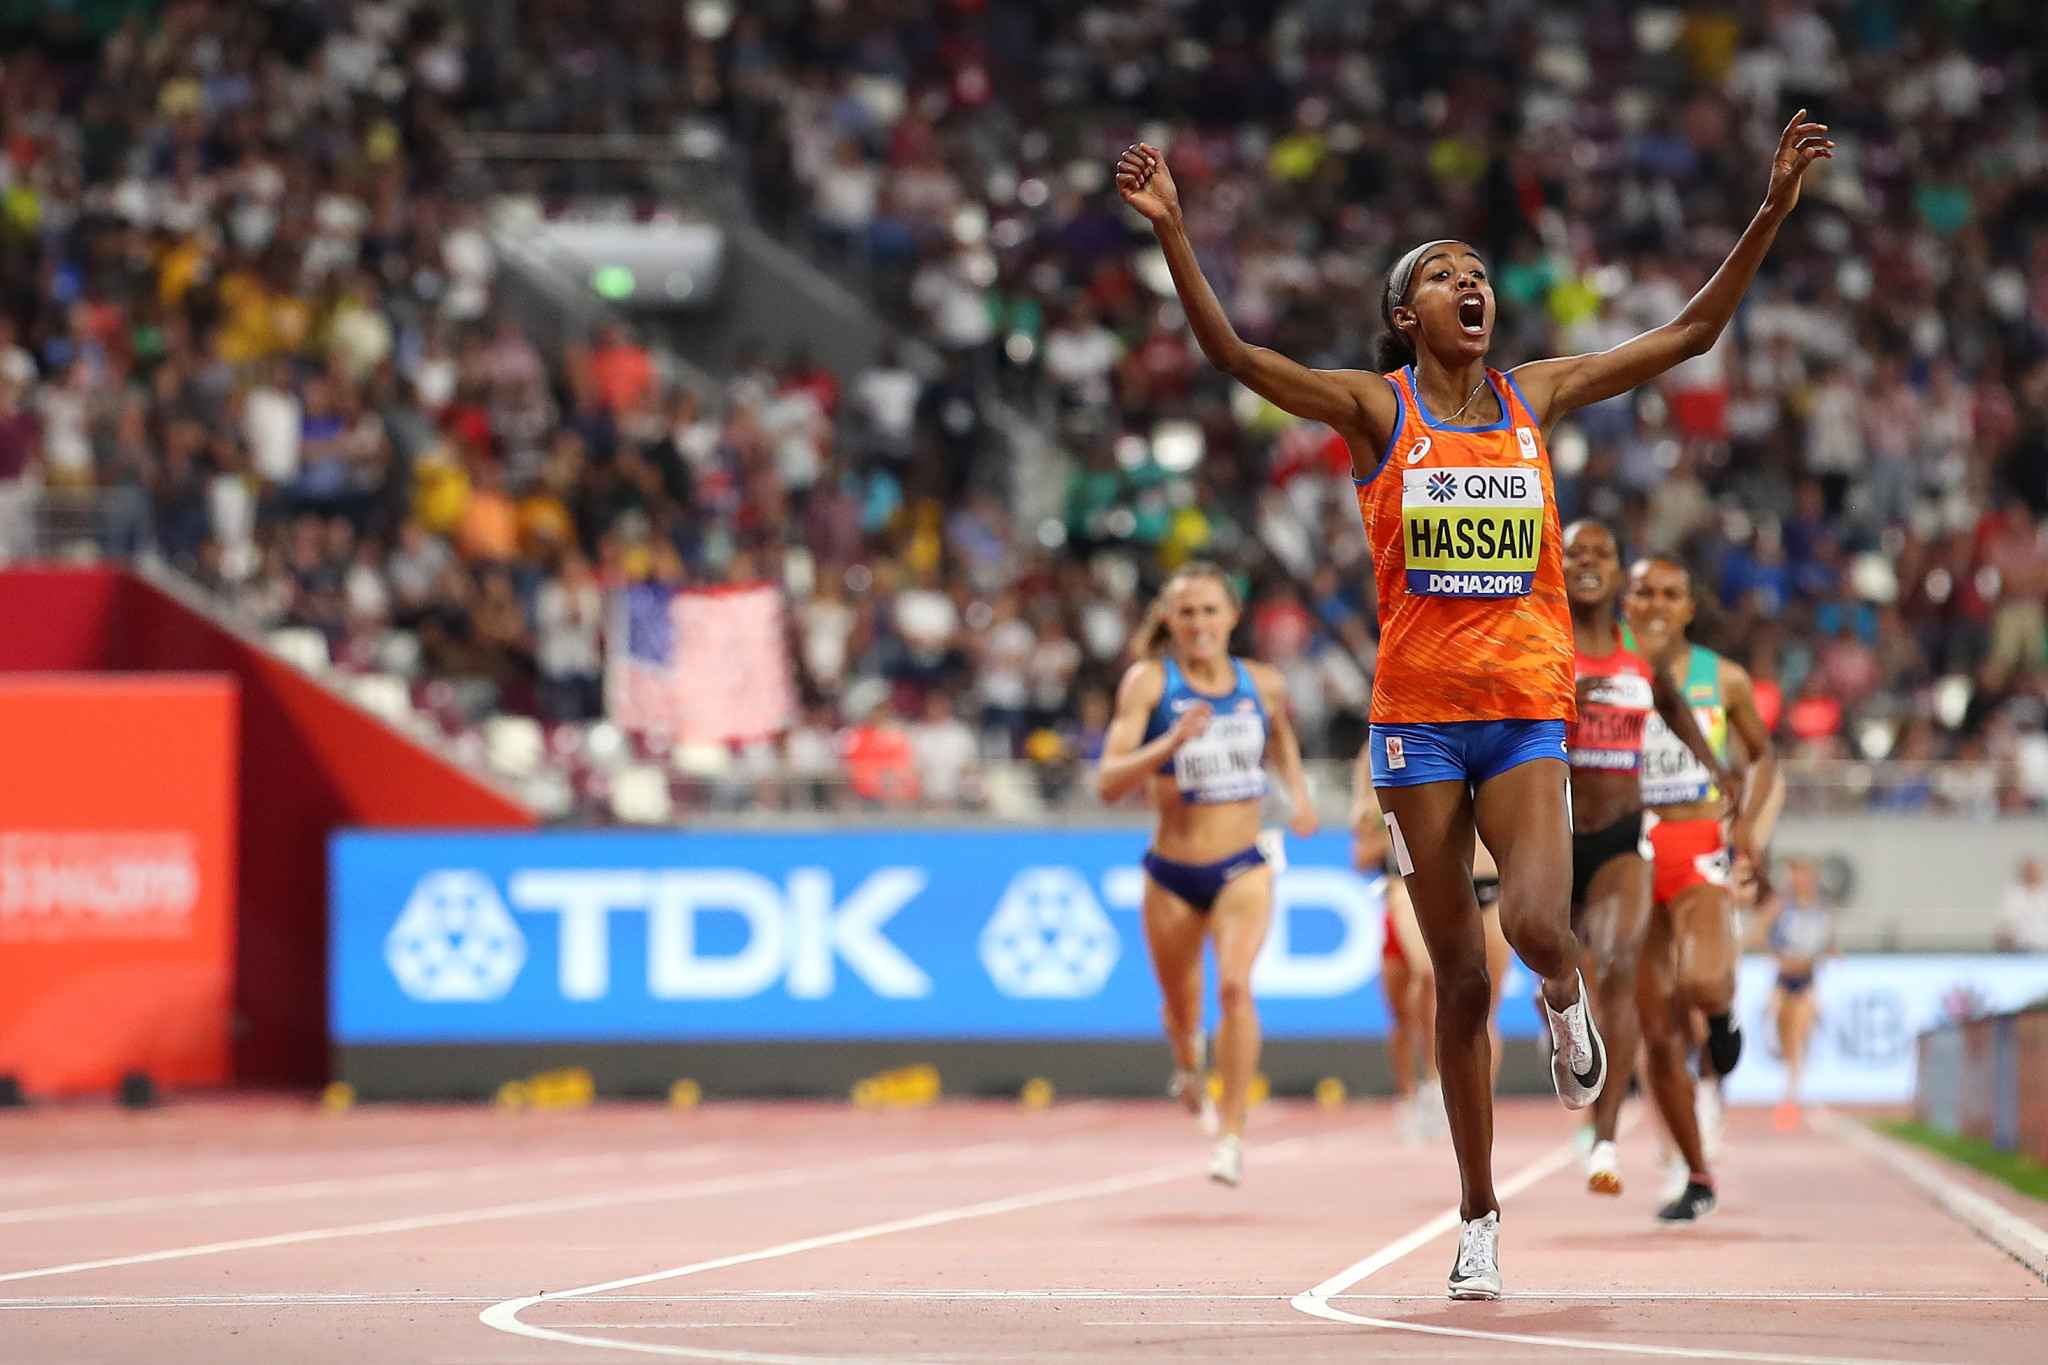 Sifan Hassan of The Netherlands completed a unique double by winning the 1,500 metres to add to the 10,000m she had won earlier in the Championships ©Getty Images